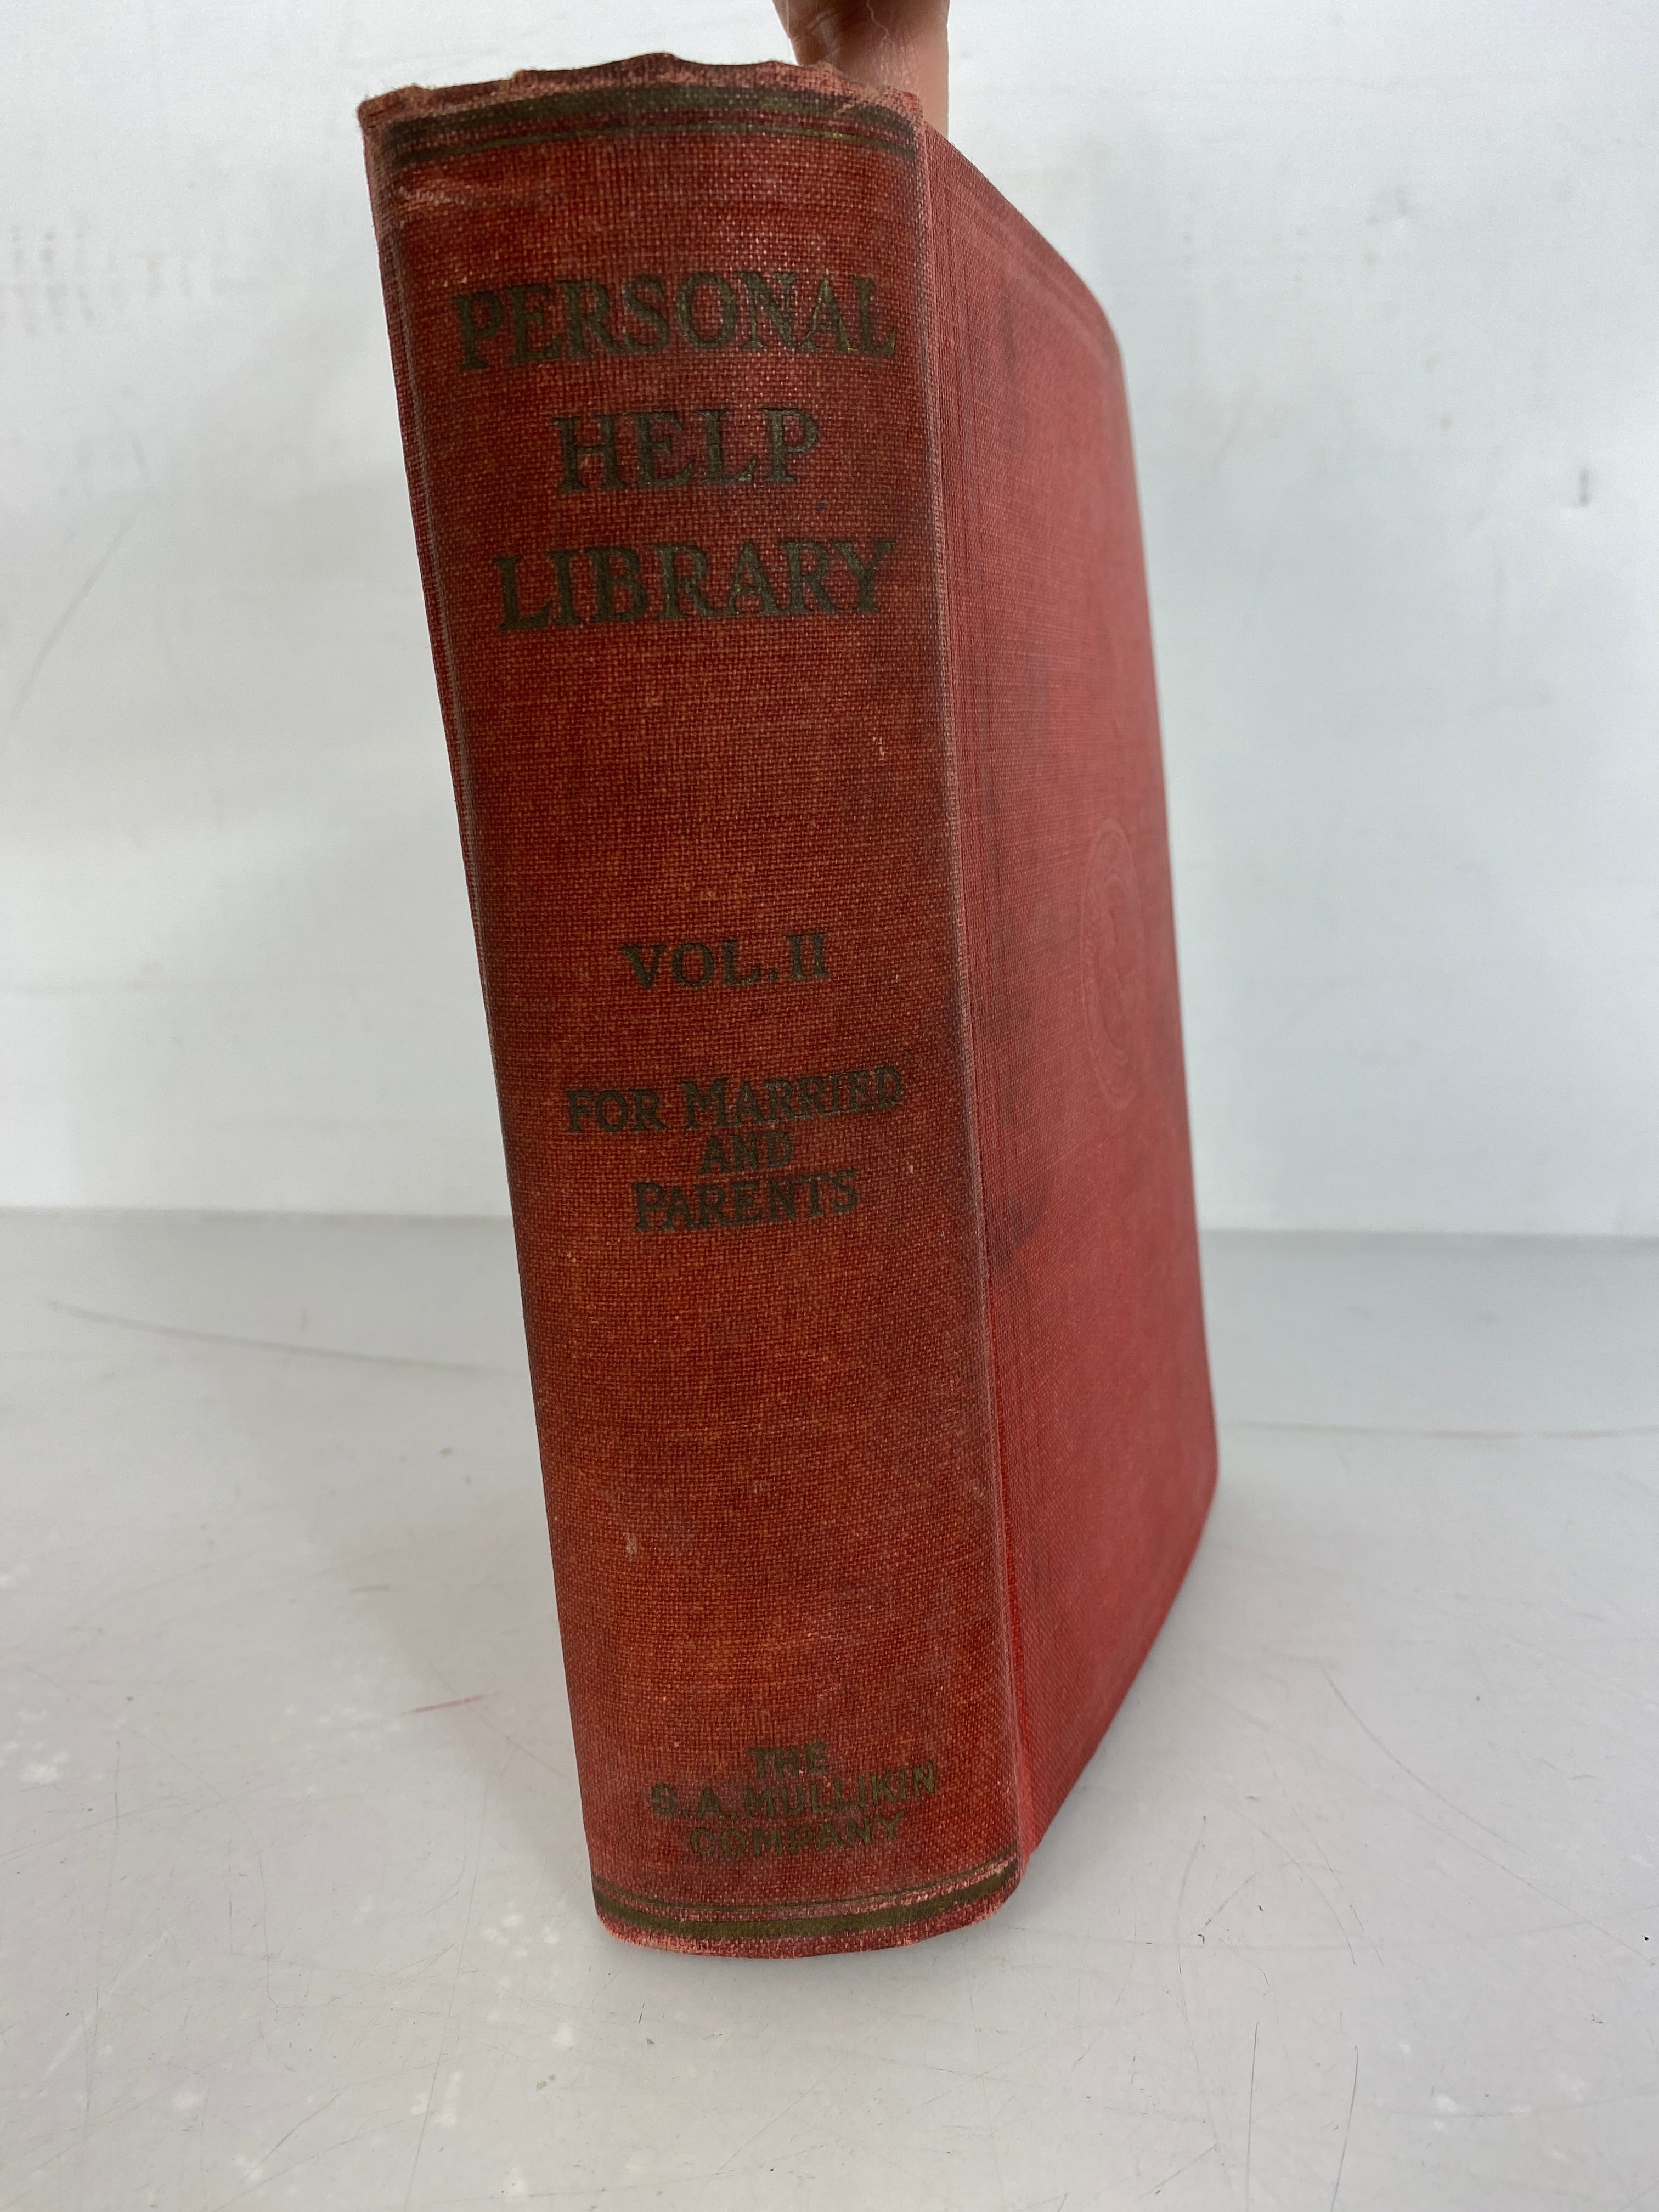 Personal Help for the Married by Thomas Shannon and W.J. Truitt 1918 HC